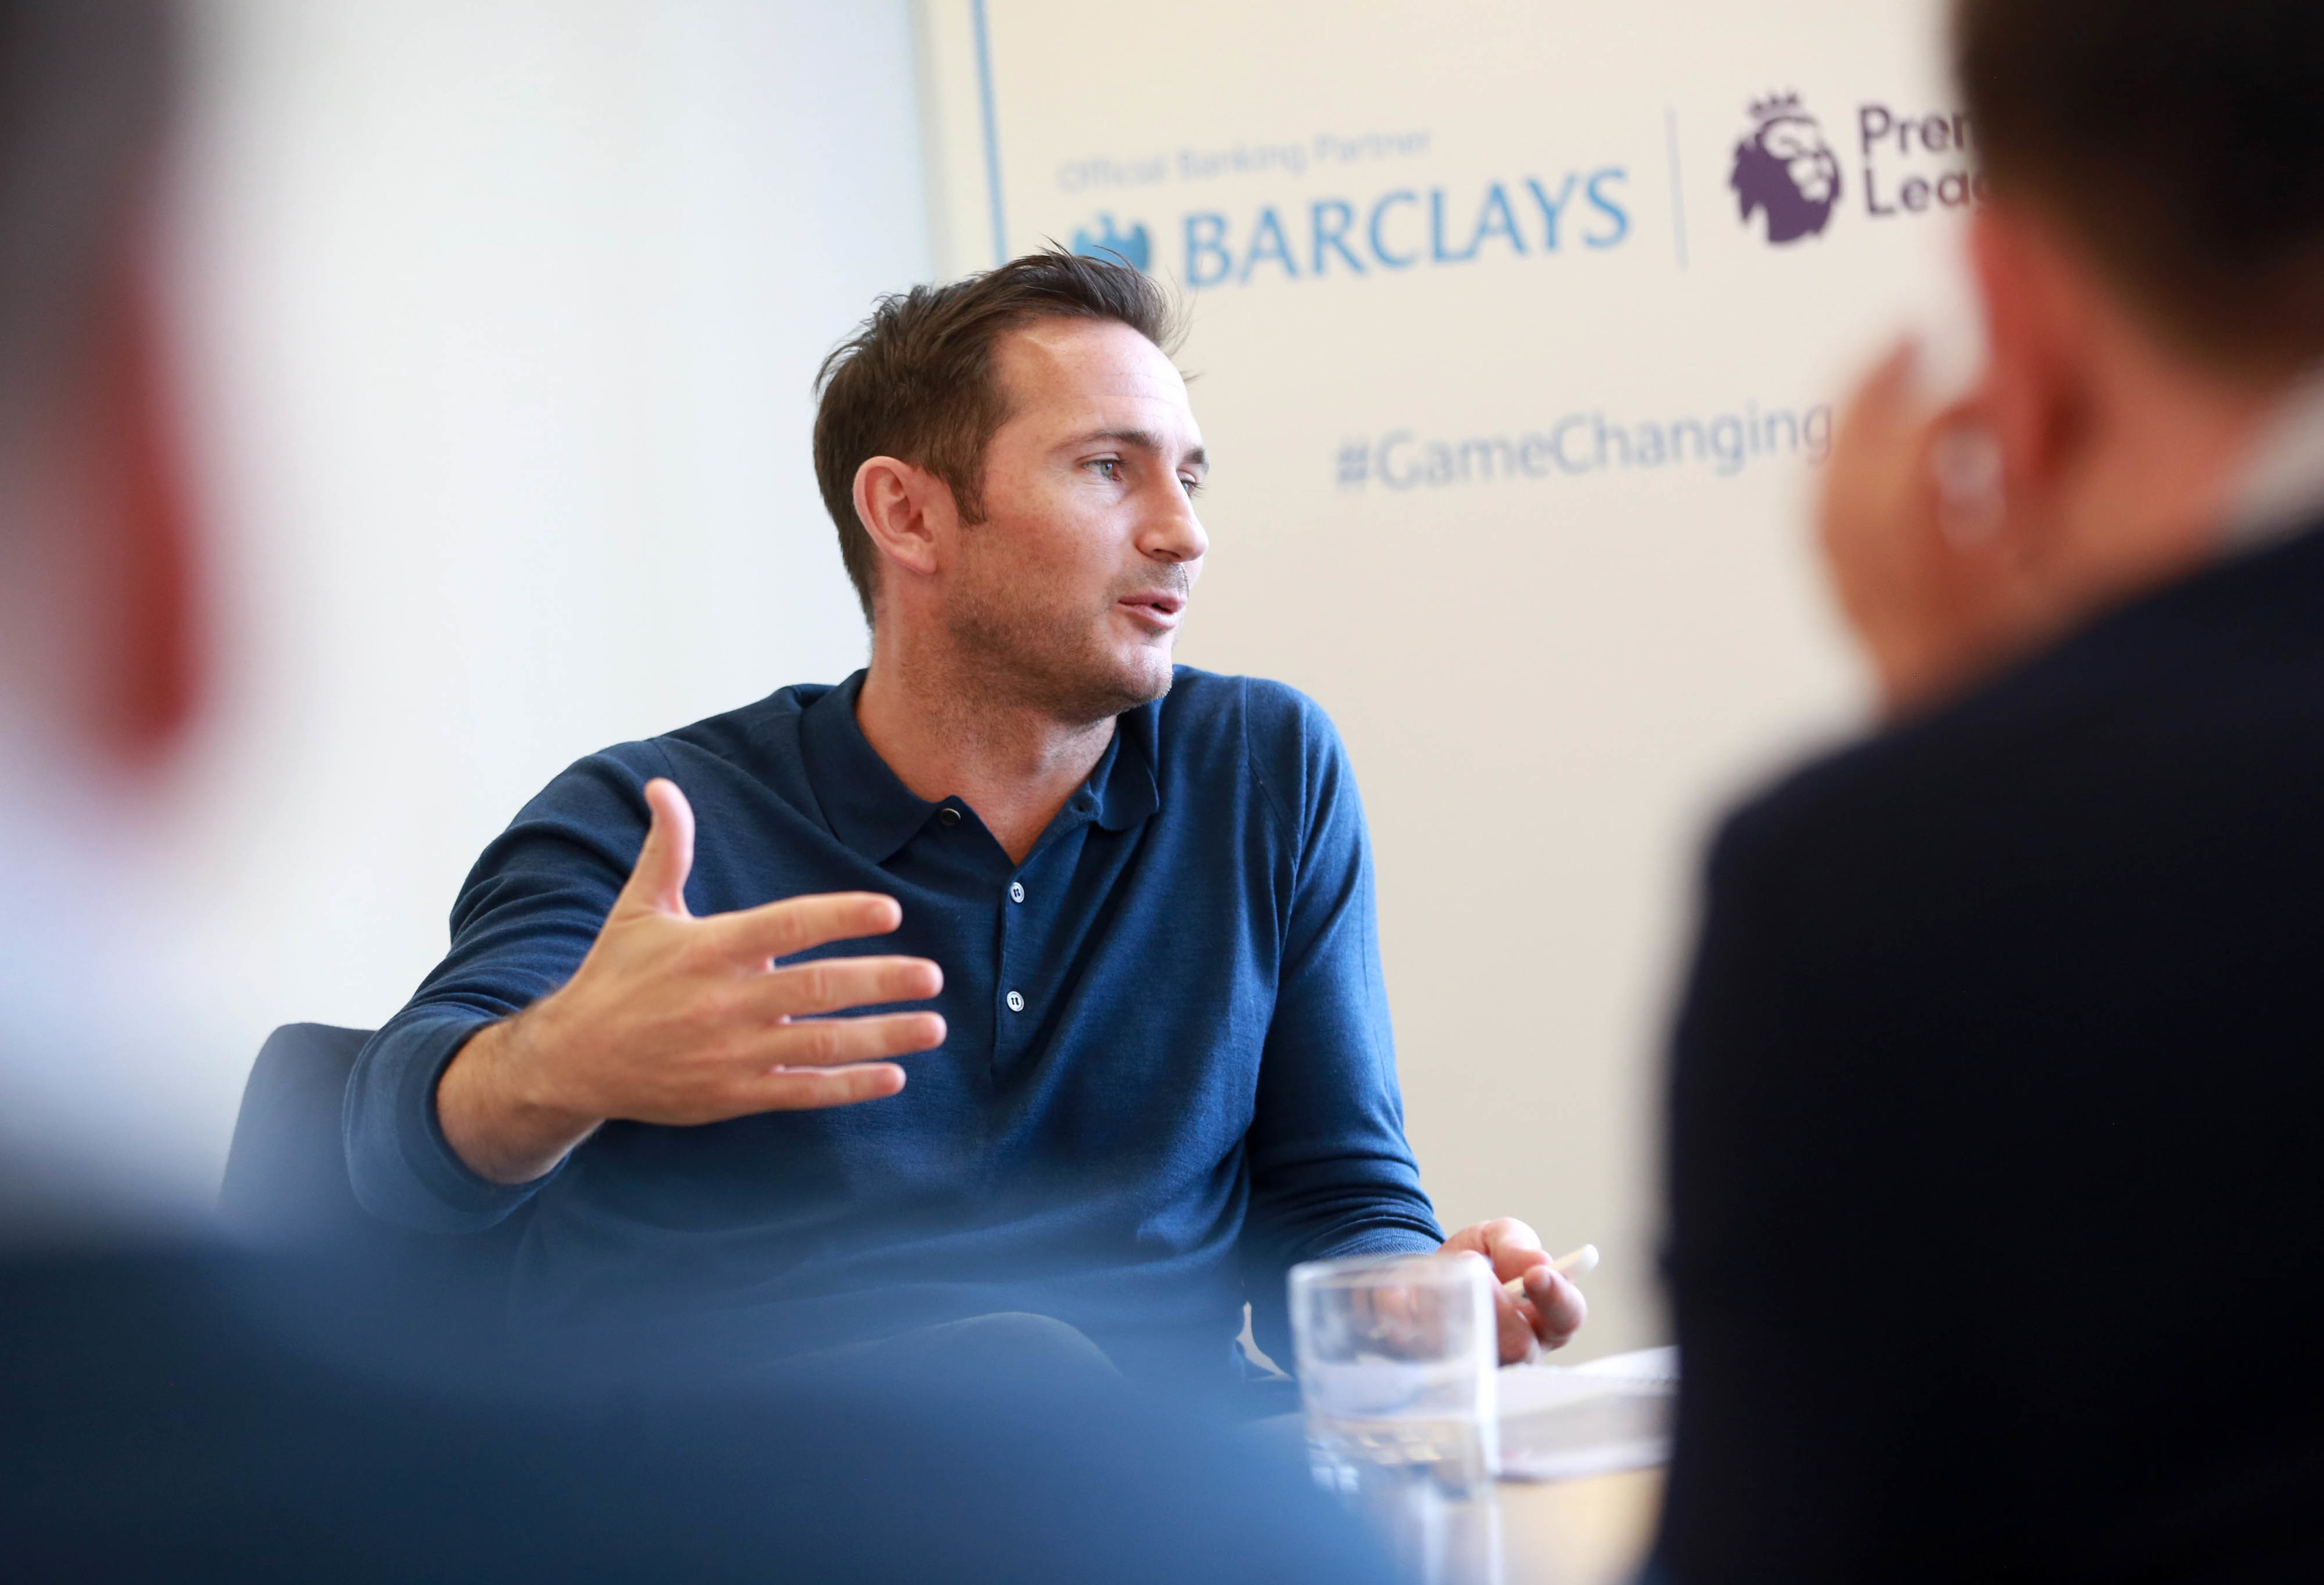 Barclays ambassador Frank Lampard attends a roundtable event in London as the bank publishes a report titled 'Game Changing fans - The 12th Player in every Premier League team.' (Matt Alexander/PA Wire)